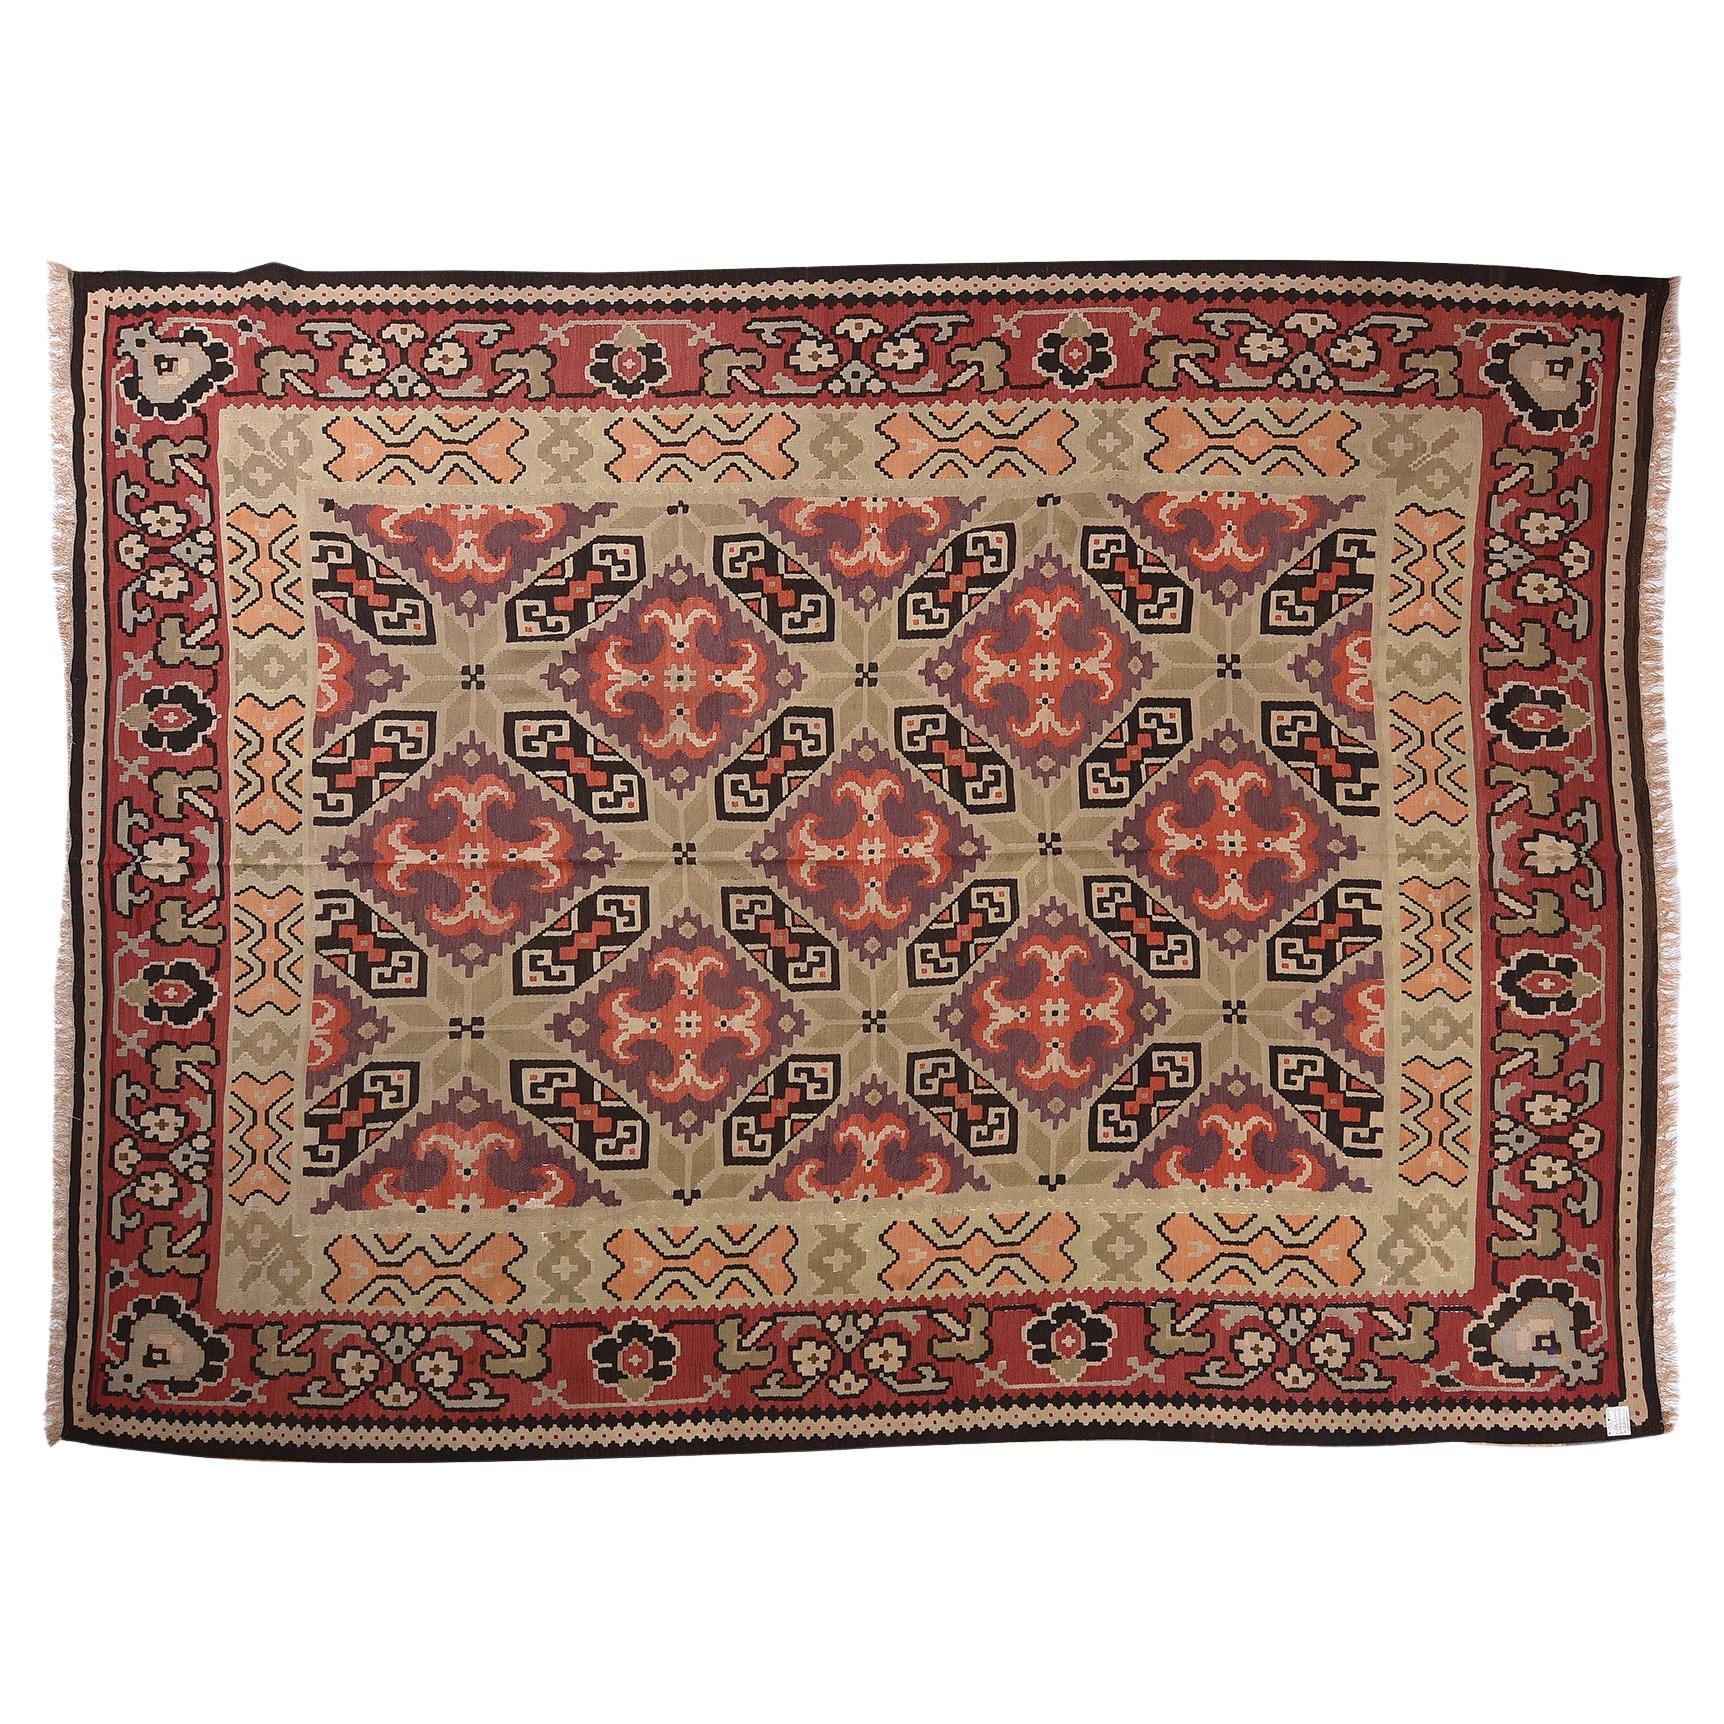 nr. 617 - Interesting large kilim from Pirot, a town in south-eastern Serbia 100 km. from the border with Bulgaria and famous for its wool.
It was certainly intended for an important dwelling: house or tent.
The pastel colors are pleasant, the